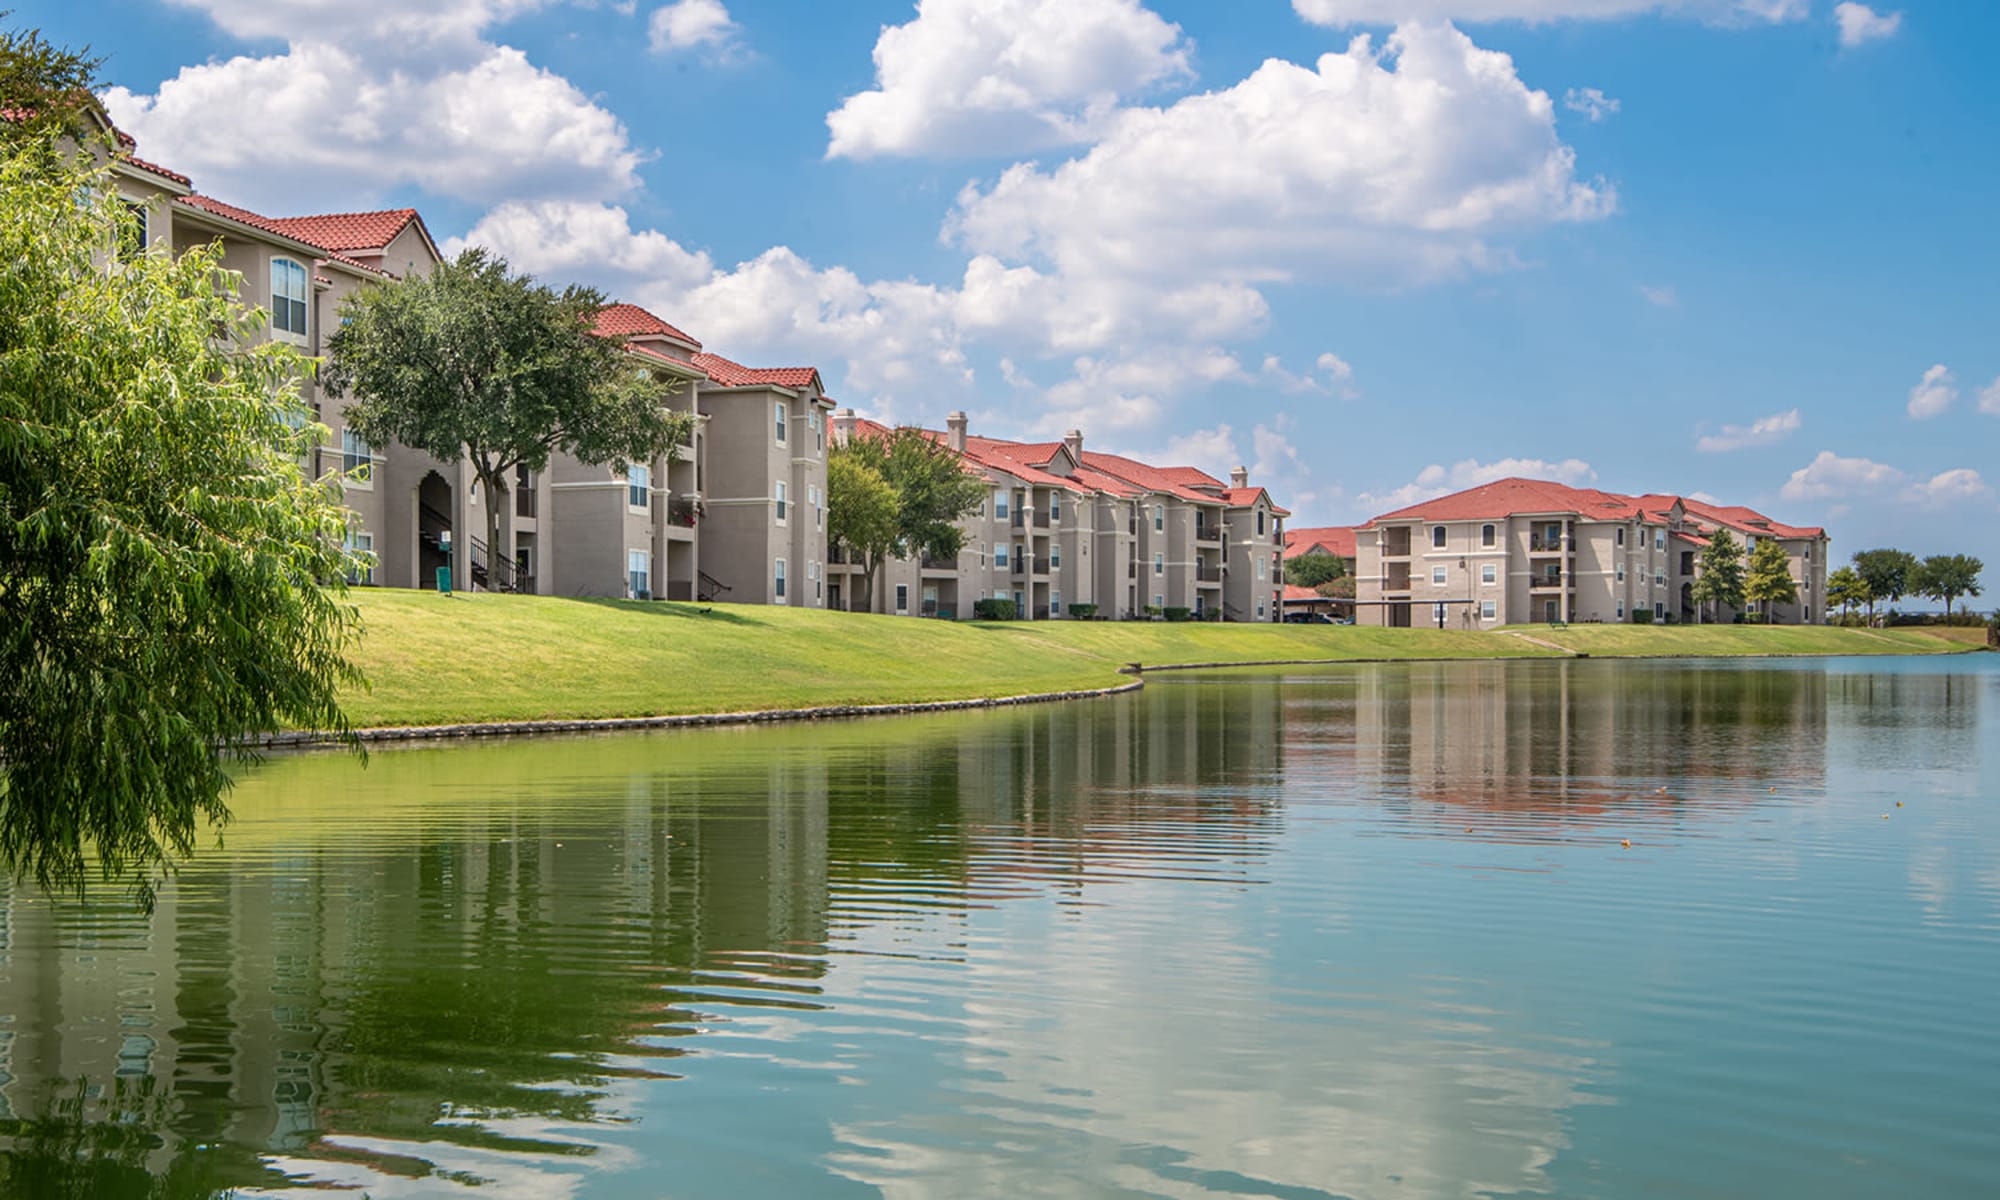 Apartments at Crescent Cove at Lakepointe in Lewisville, Texas